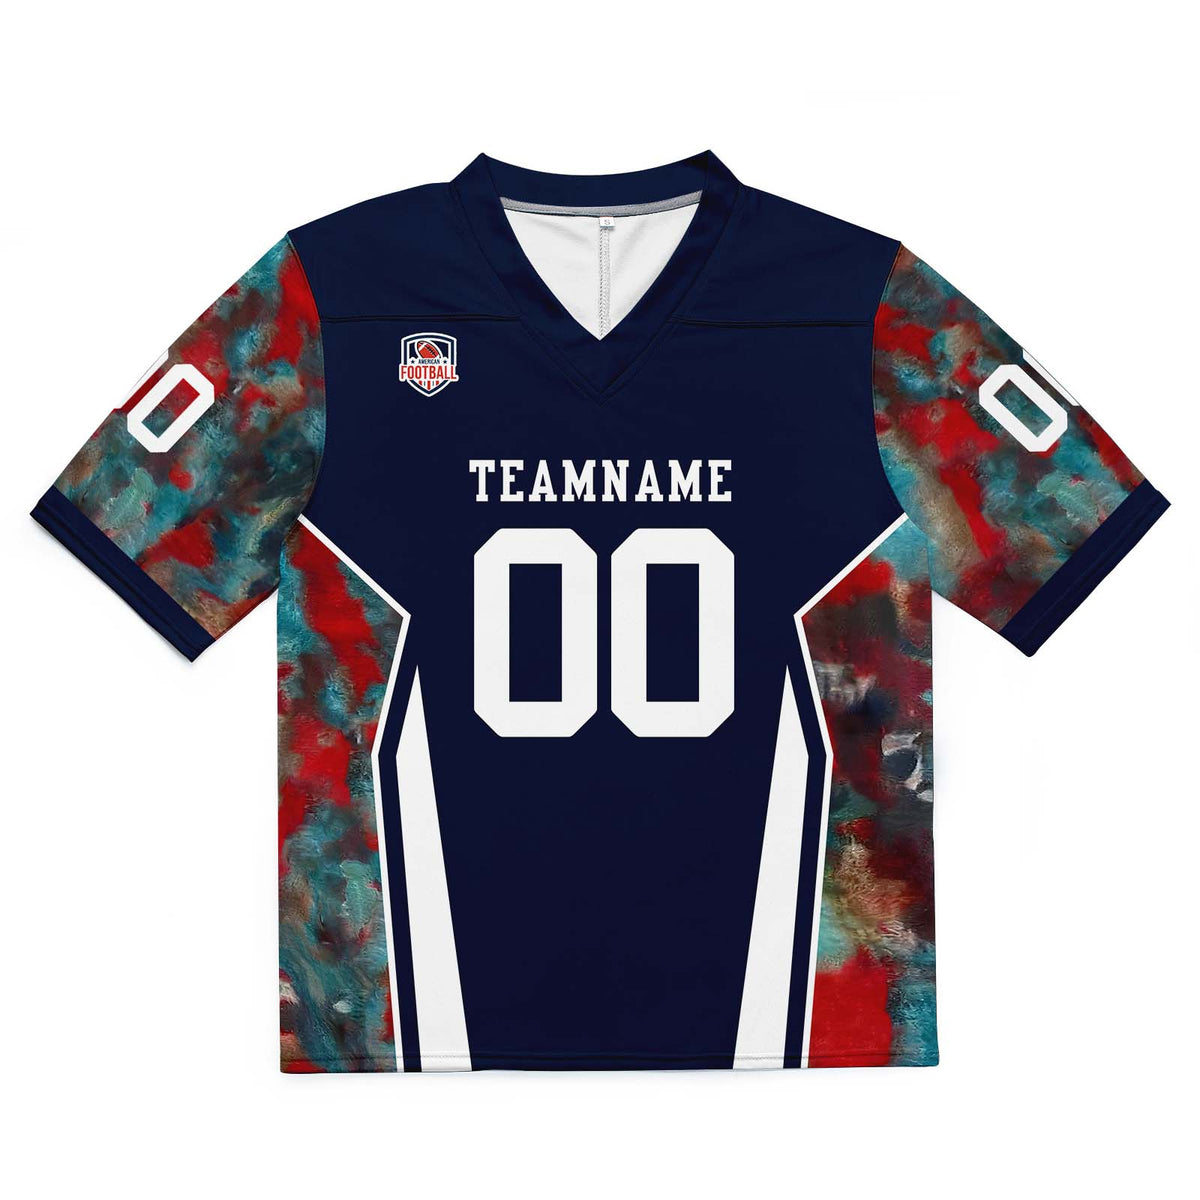 Custom Football Jersey Shirt Personalized Stitched Printed Team Name Number Navy & Red